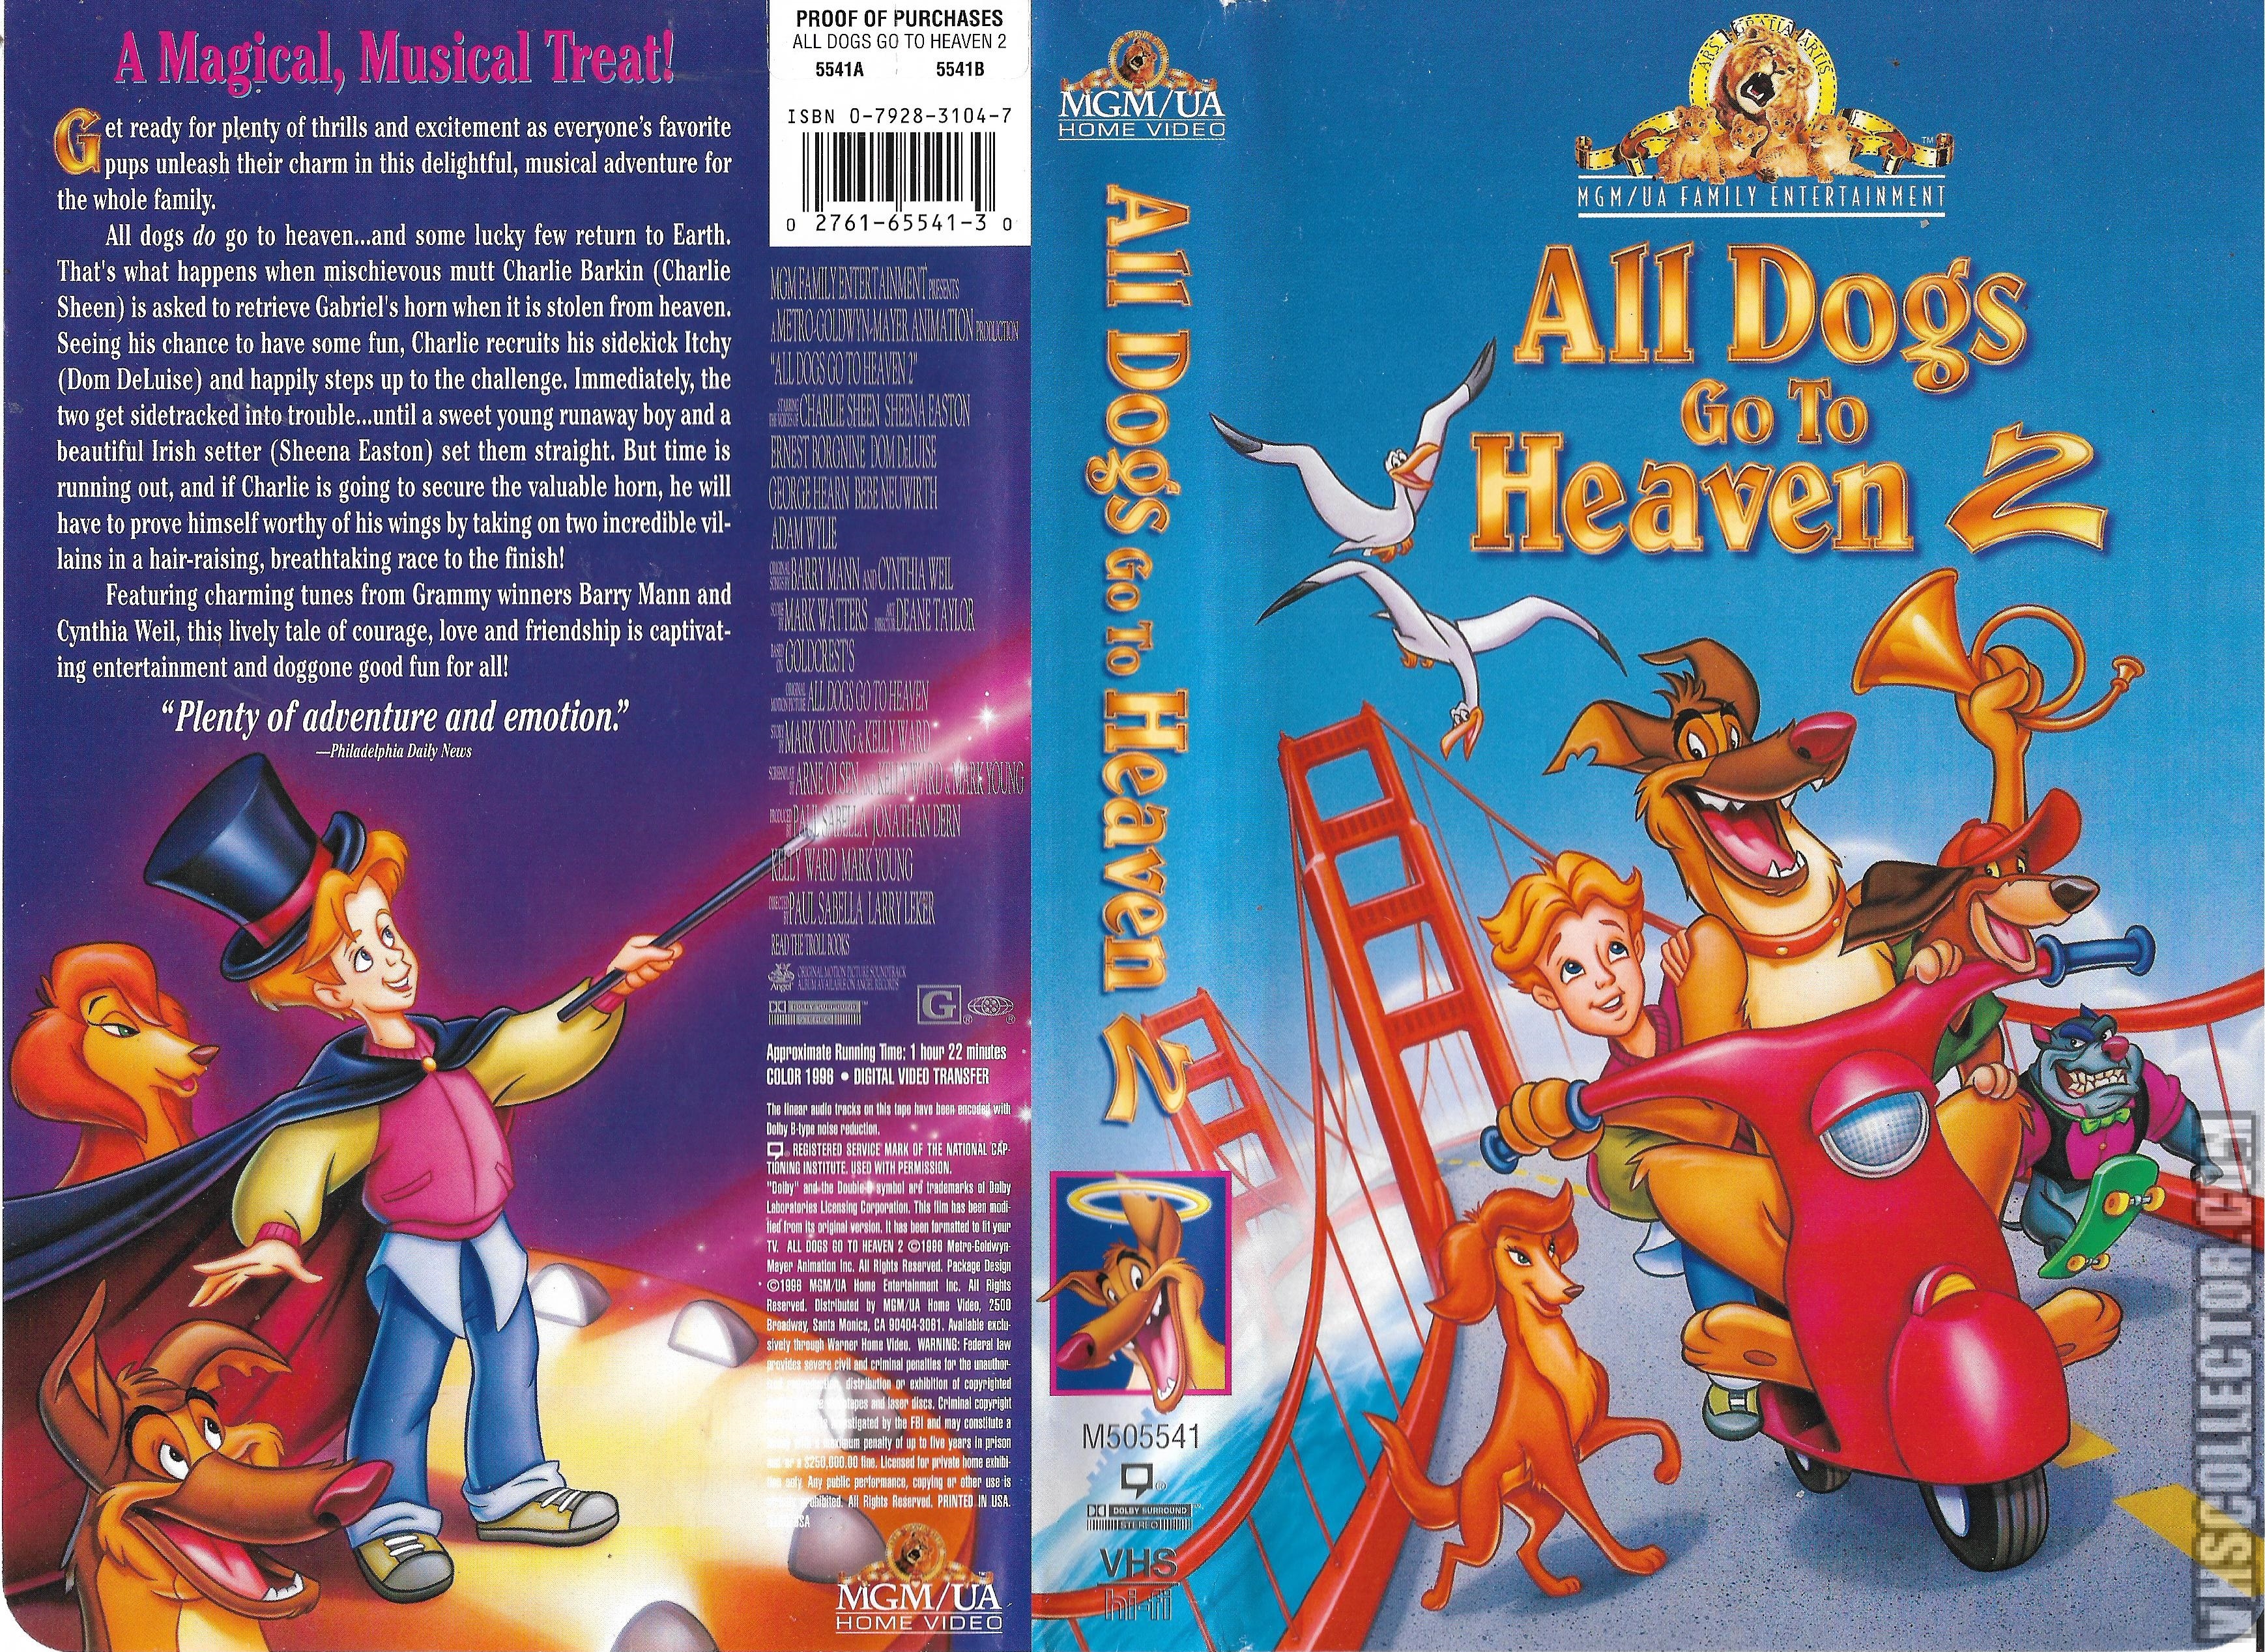 All dogs go to heaven 2 ending